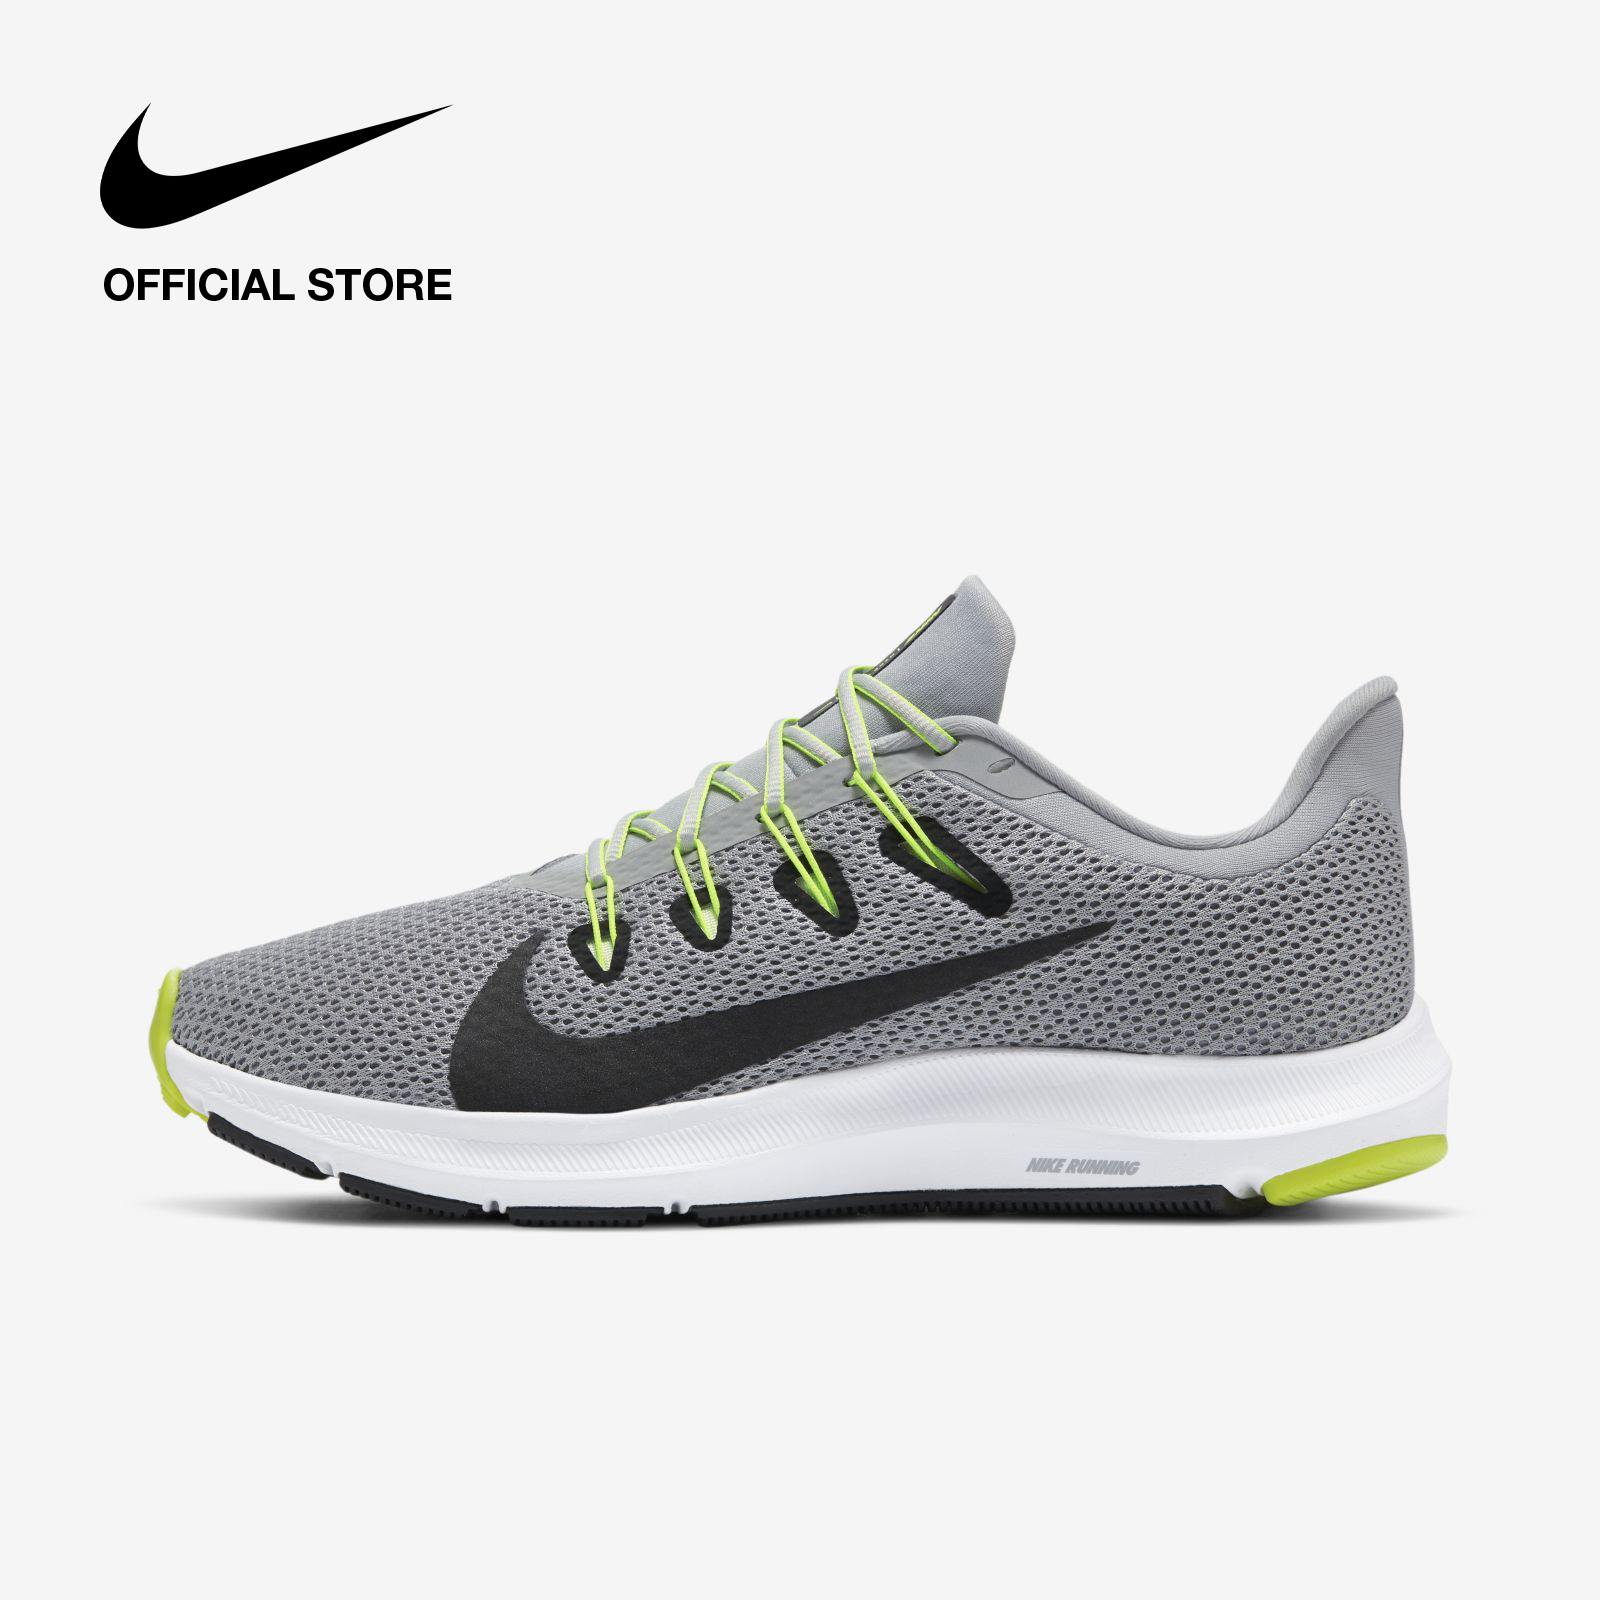 nike men's quest 2 running shoes